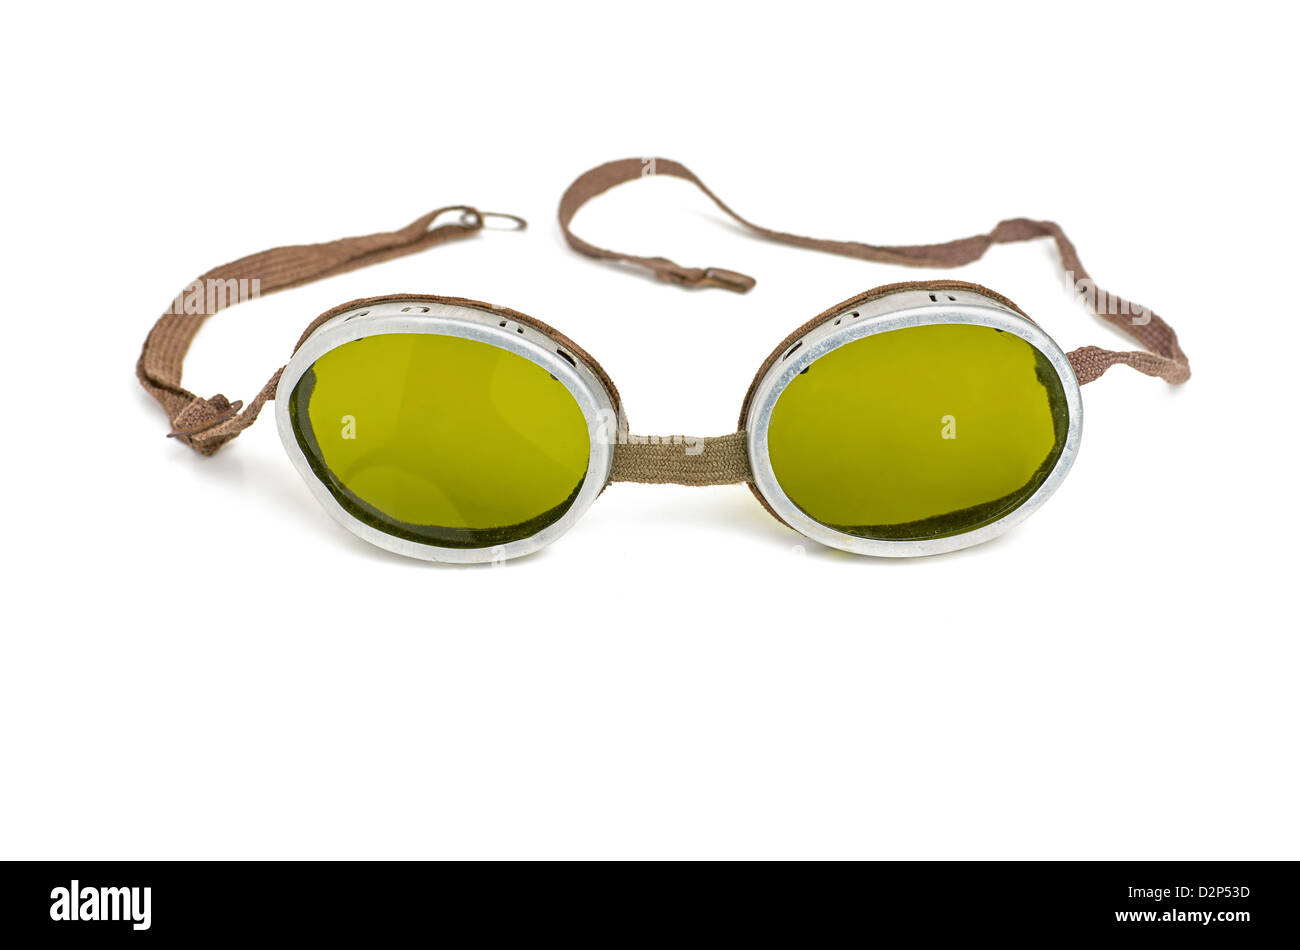 old safety goggles with green tinted glasses Stock Photo